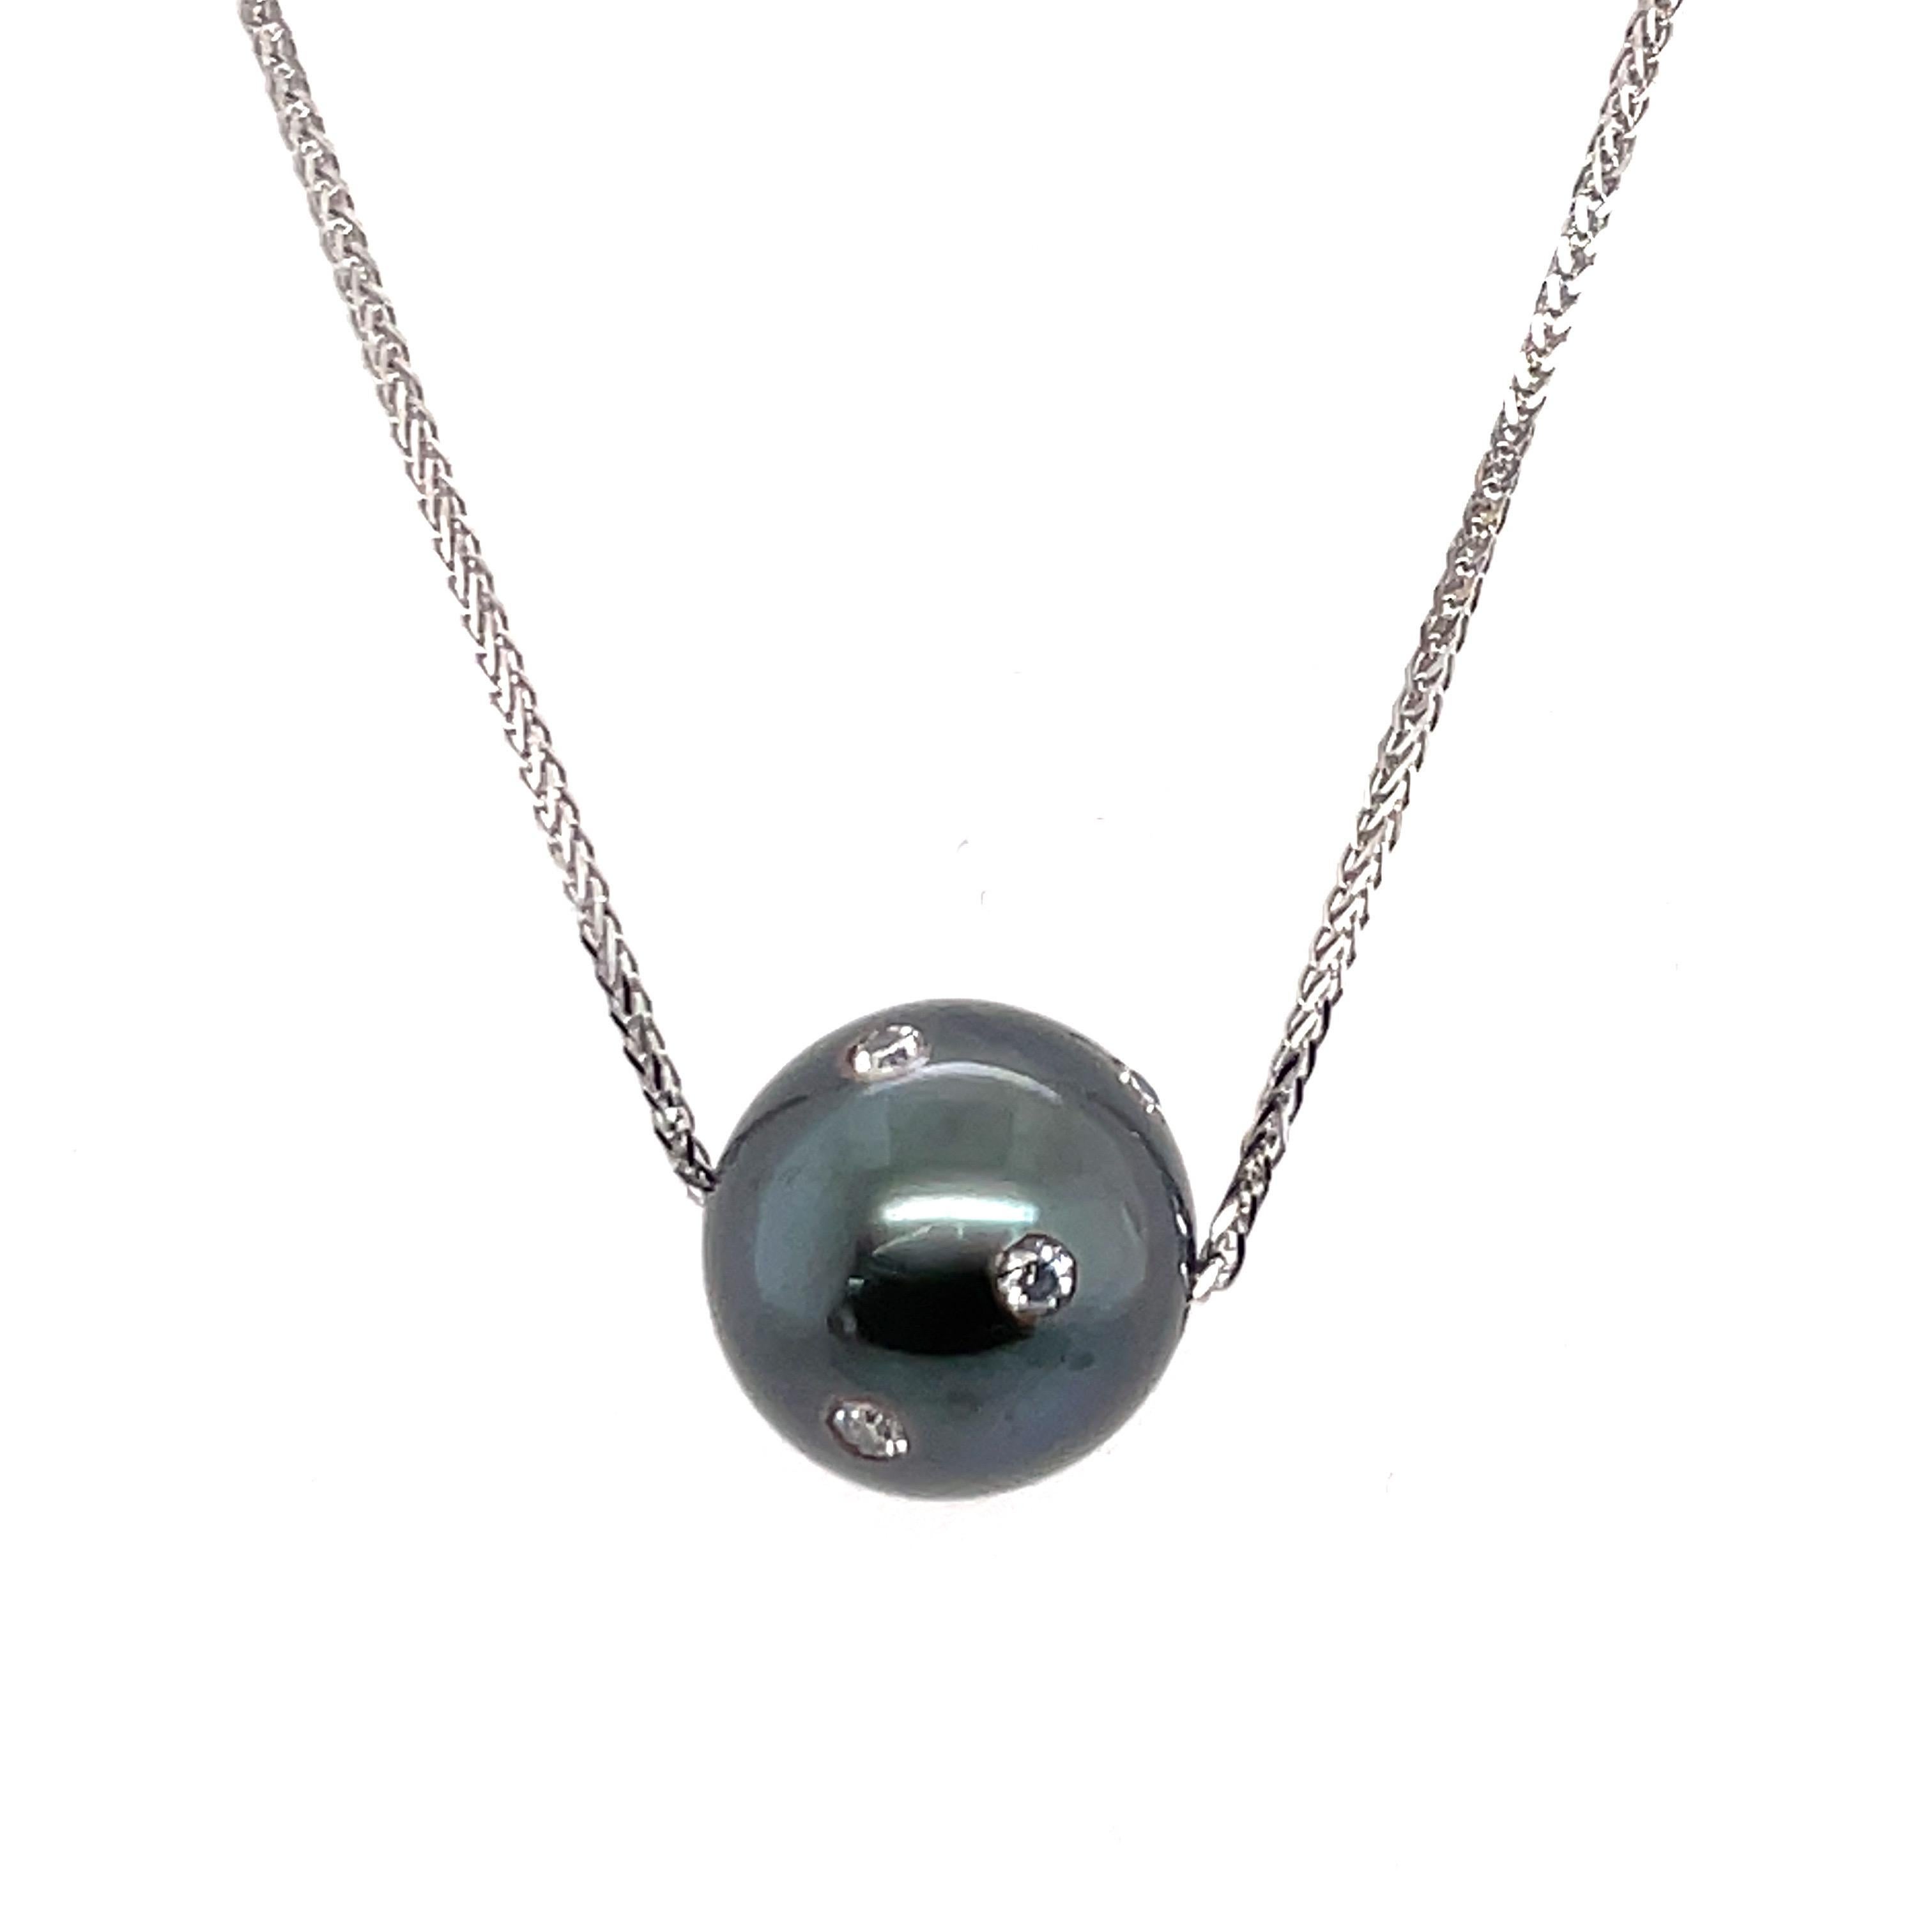 18 Karat White Gold pendant featuring one grey Tahitian pearl measuring 13-14 mm with decorative shattered diamonds weighing 0.29 carats.
Available in different pearl and gold color.
DM for more information!
